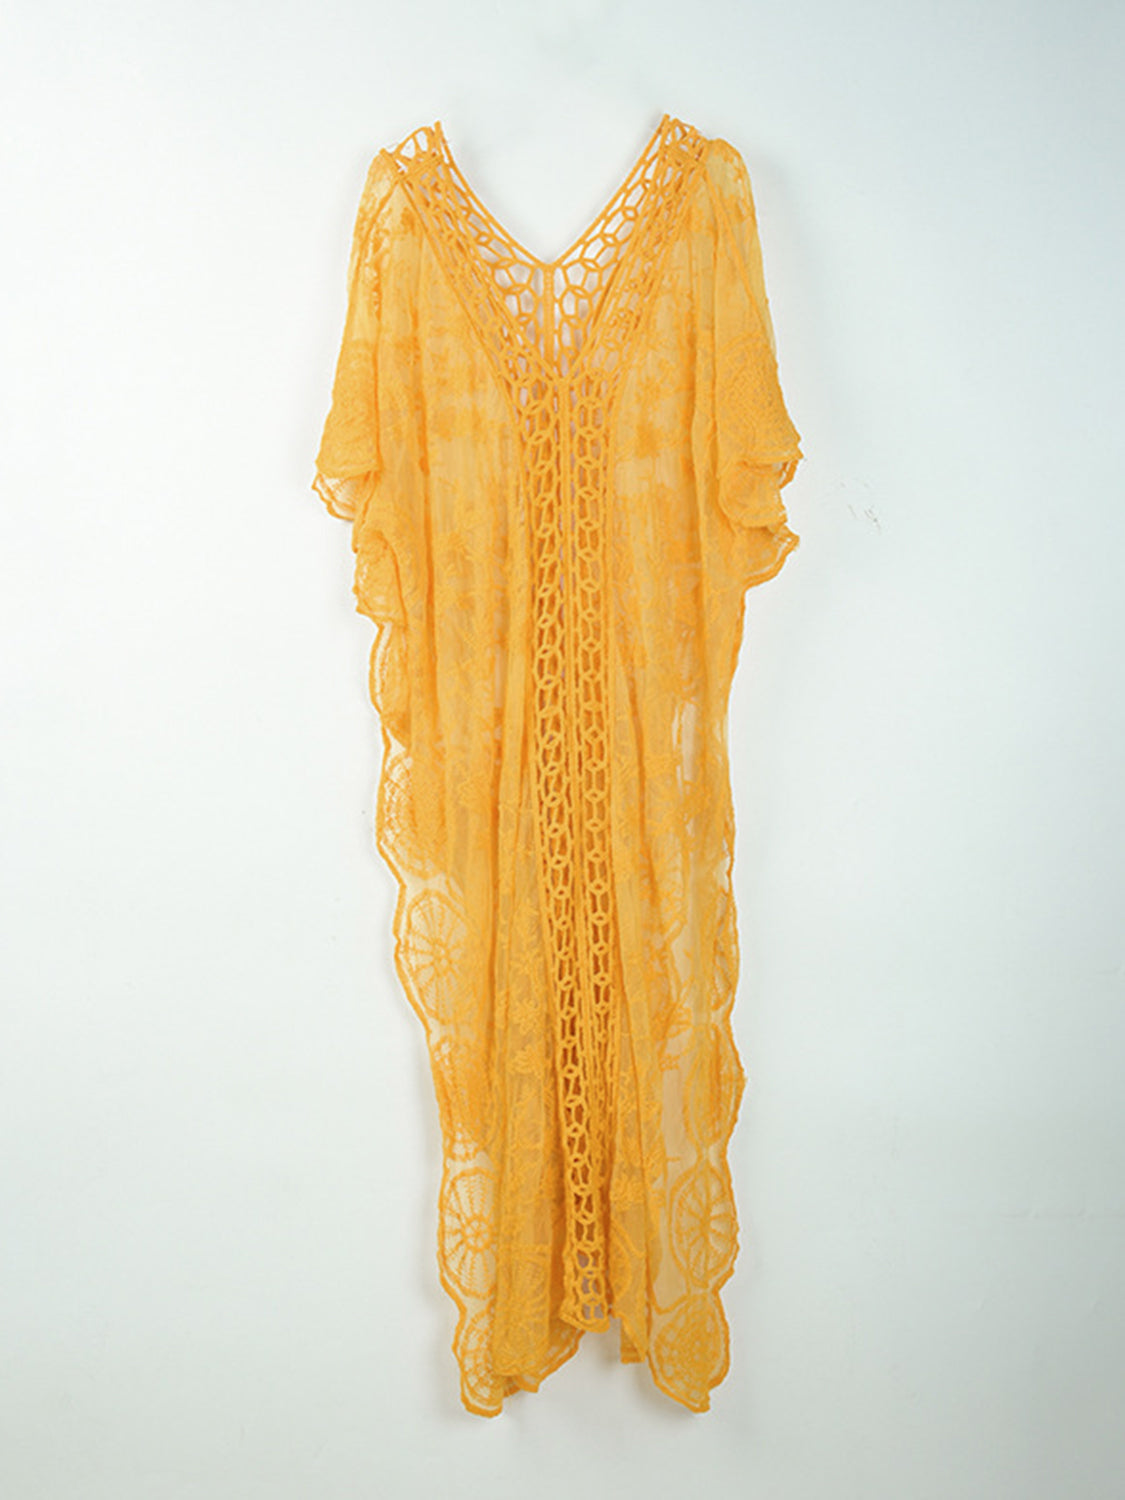 Lace Half Sleeve Cover-Up - choice of colors